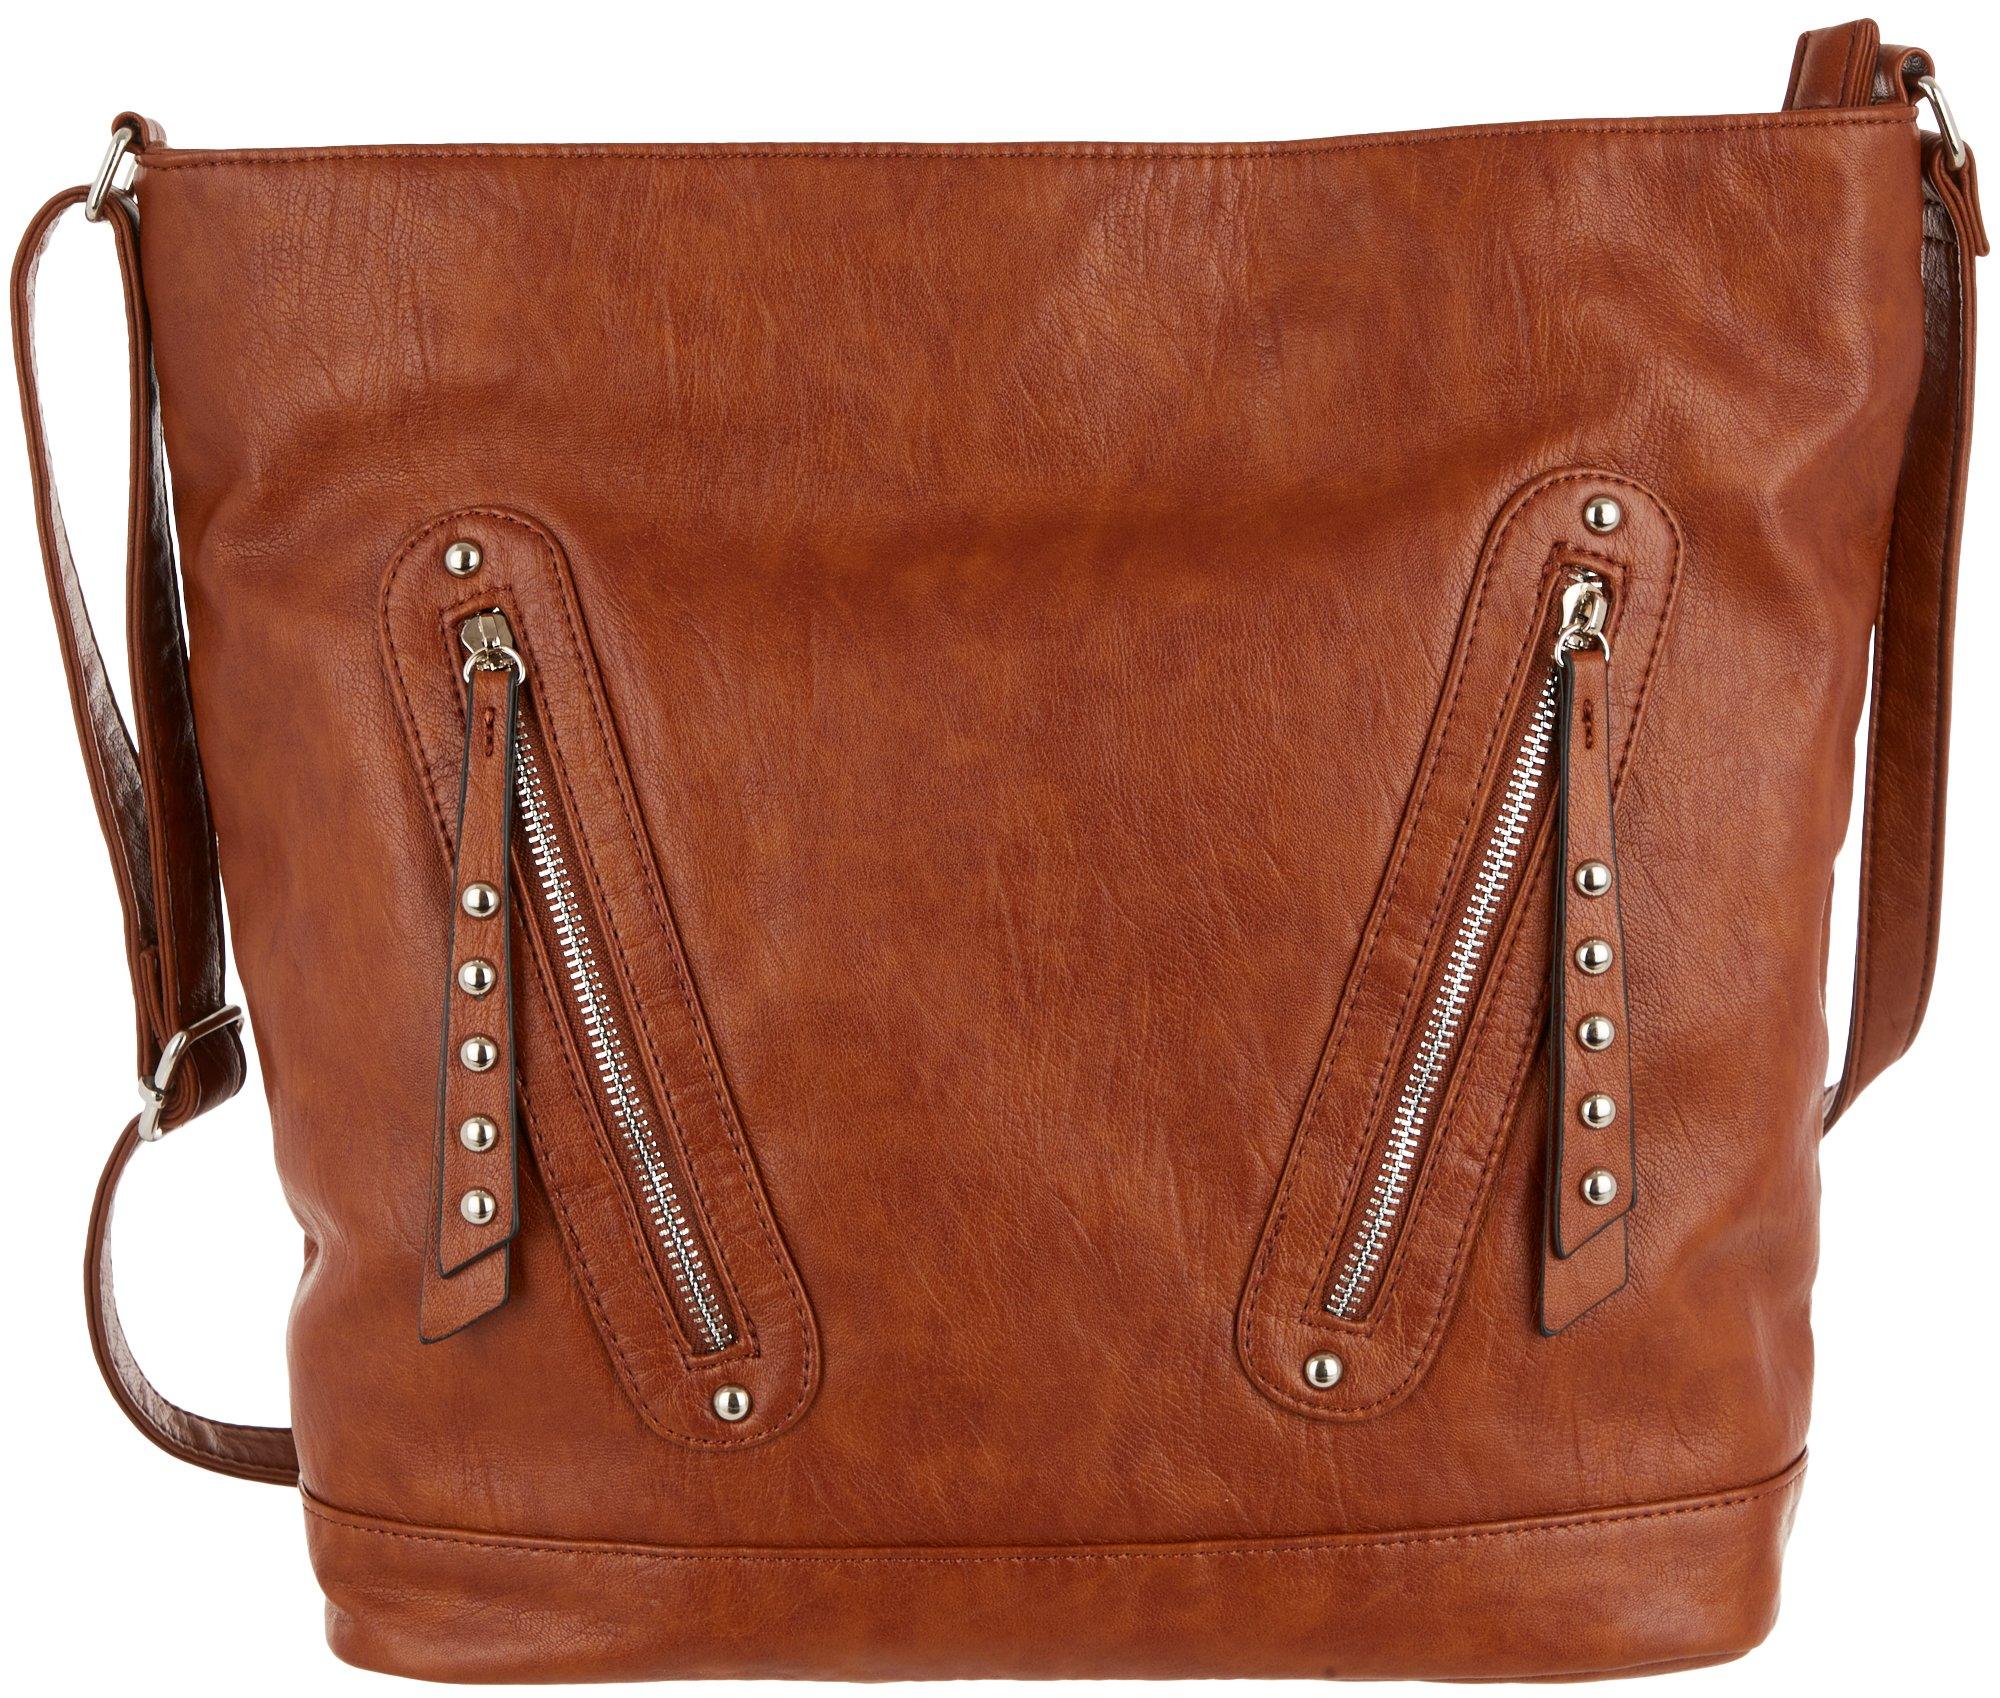 Faux Leather Tote Bag